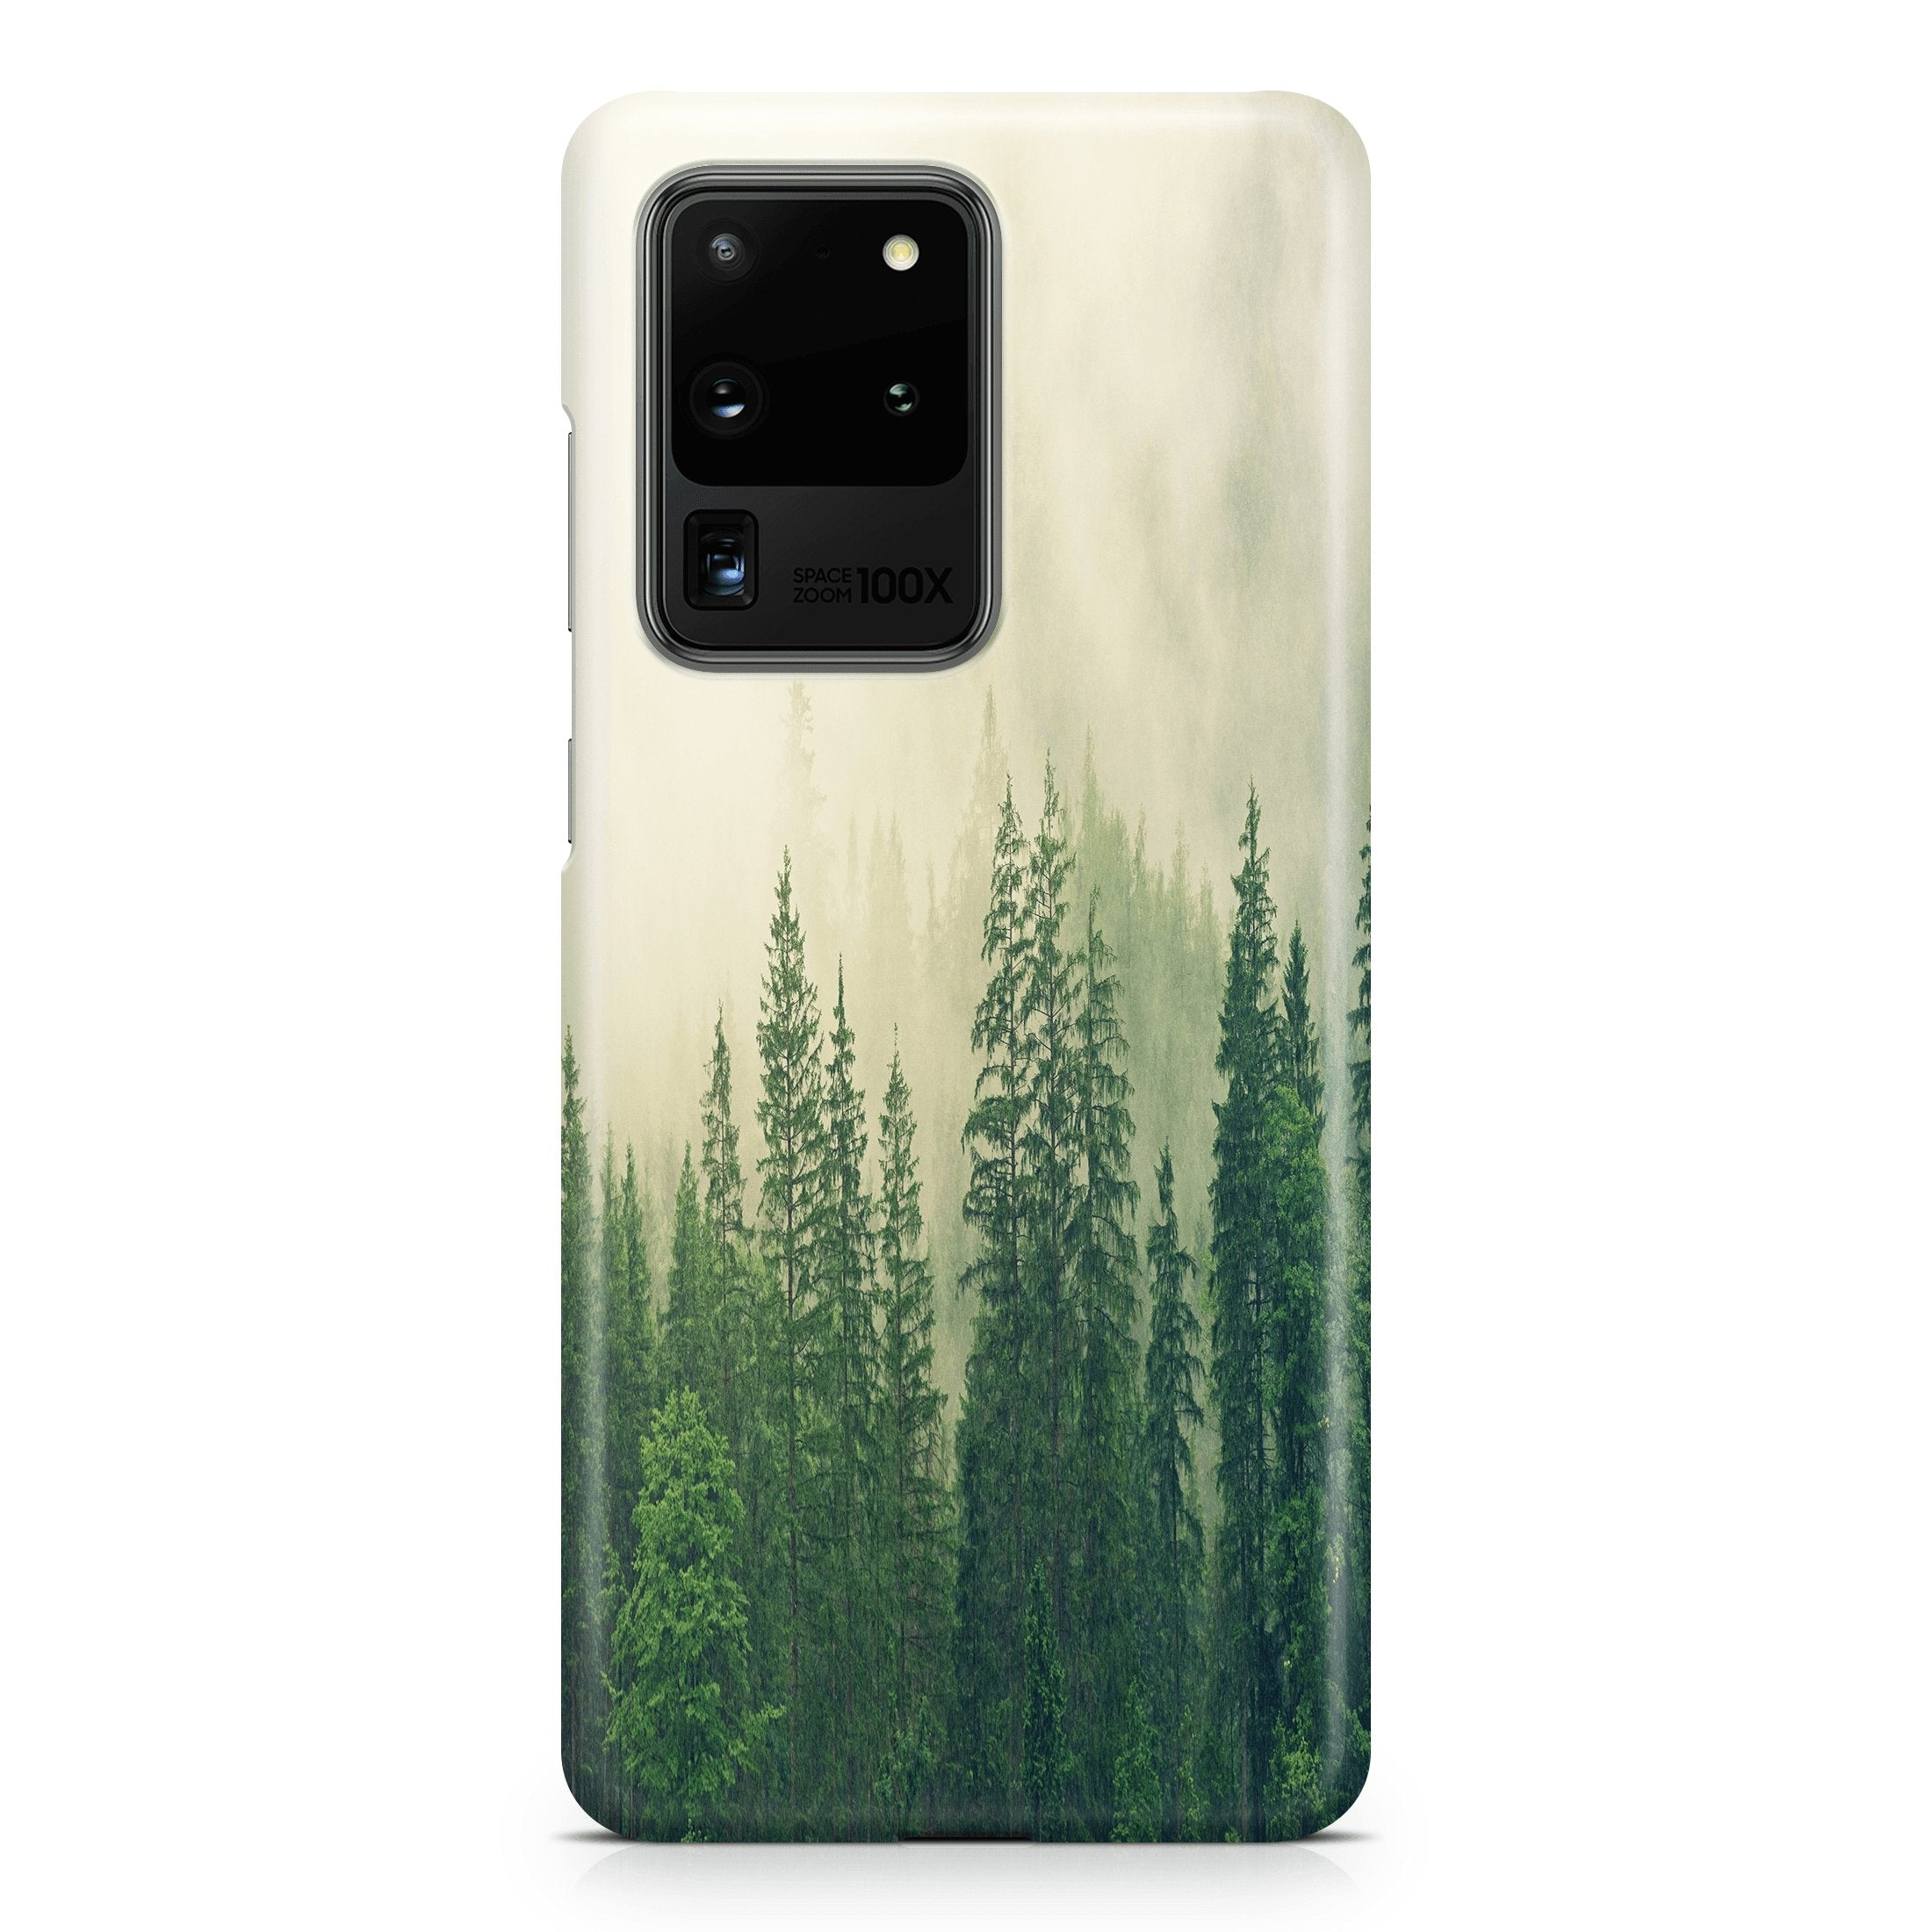 Fog Forest - Samsung phone case designs by CaseSwagger